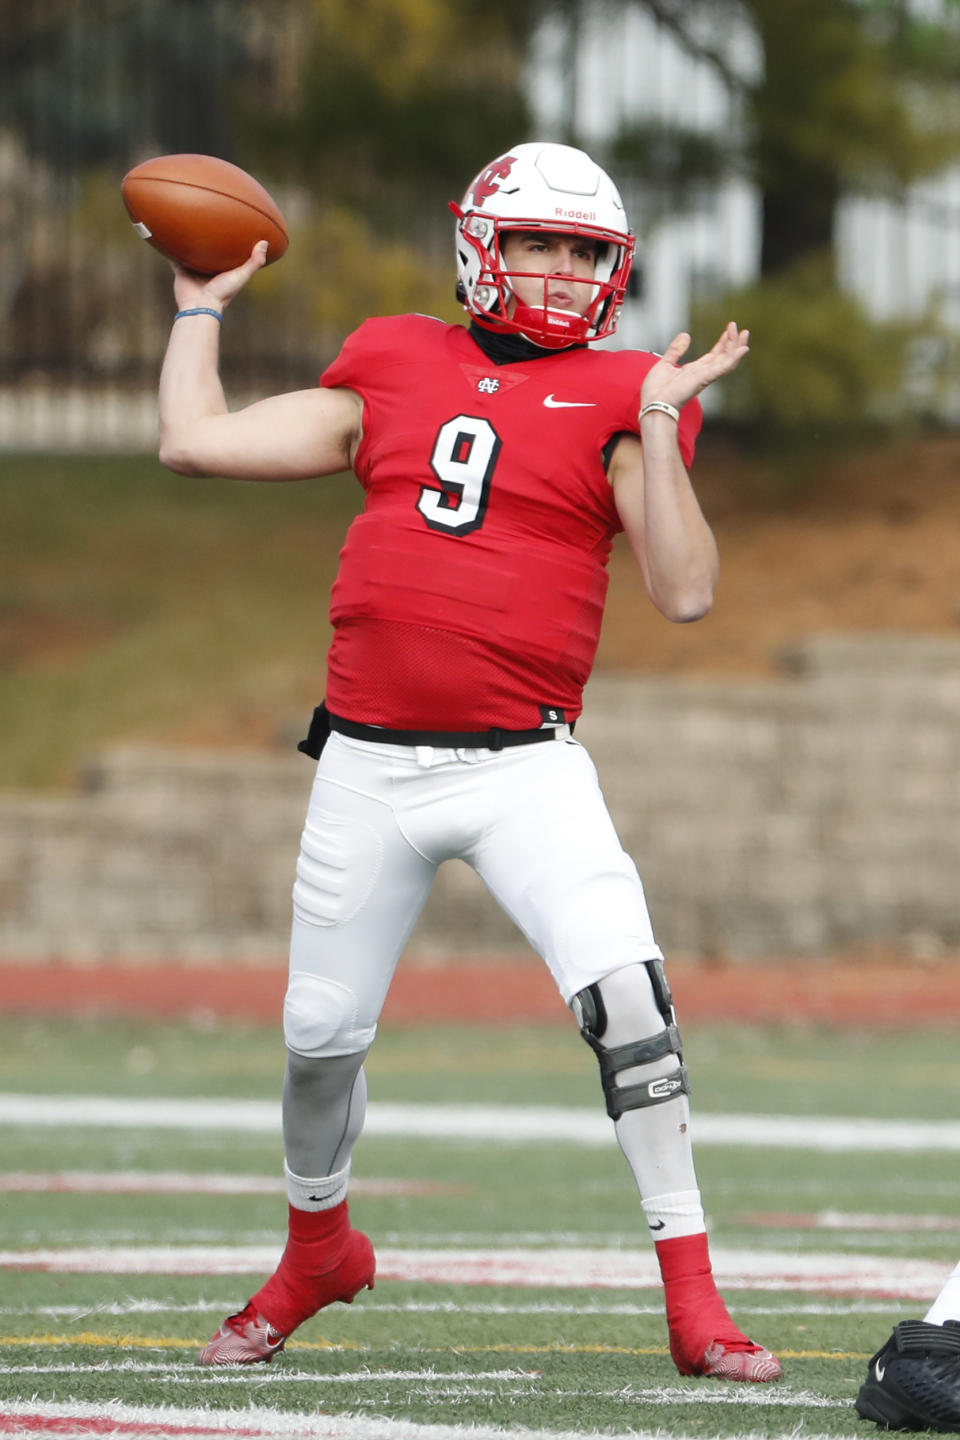 In this Nov. 23, 2019 photo, provided by North Central College Athletics, North Central quarterback Broc Rutter throws a pass against Wabash during an NCAA college football game in Naperville, Ill. Rutter was selected to the Division III All-America first team on Thursday, Dec. 19, 2019. (Steve Woltmann/North Central College Athletics via AP)